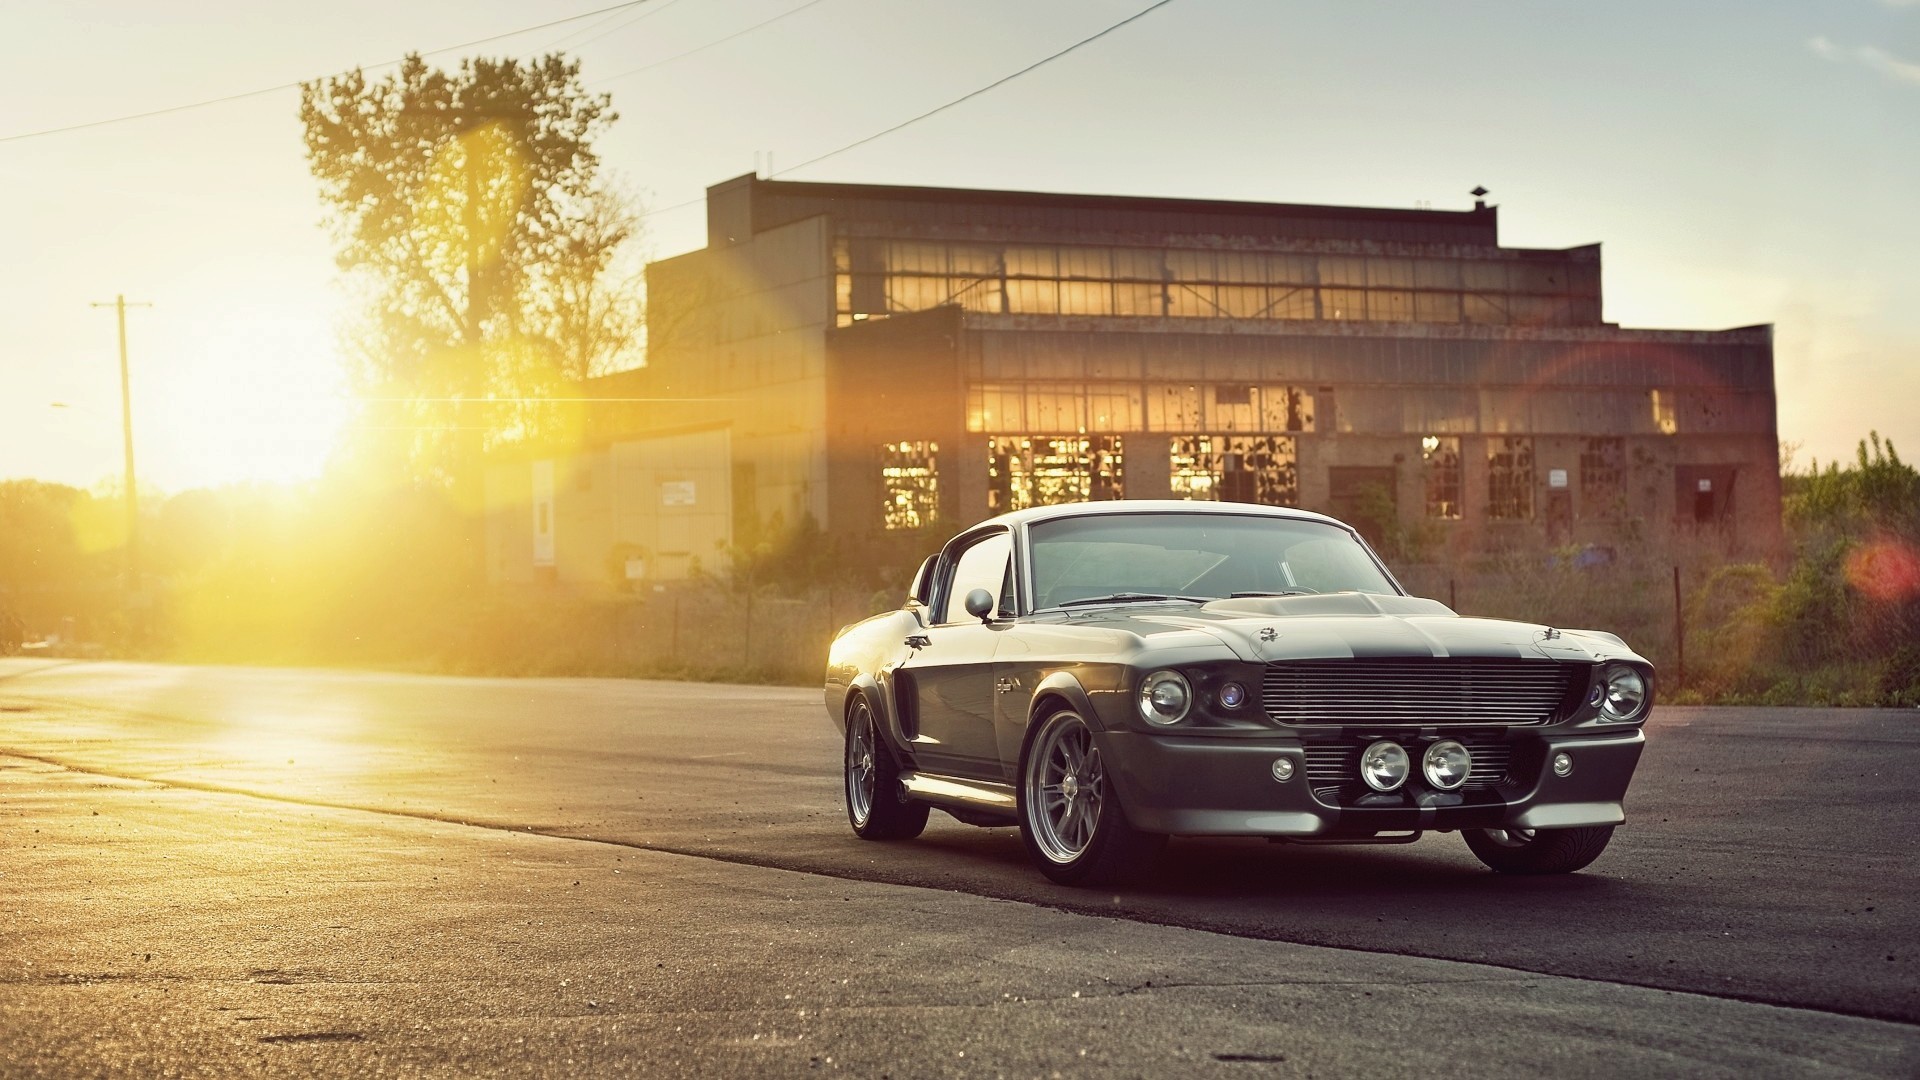 1920x1080 Shelby-Mustang-For-Mac-Xh-wallpaper-wp2009650